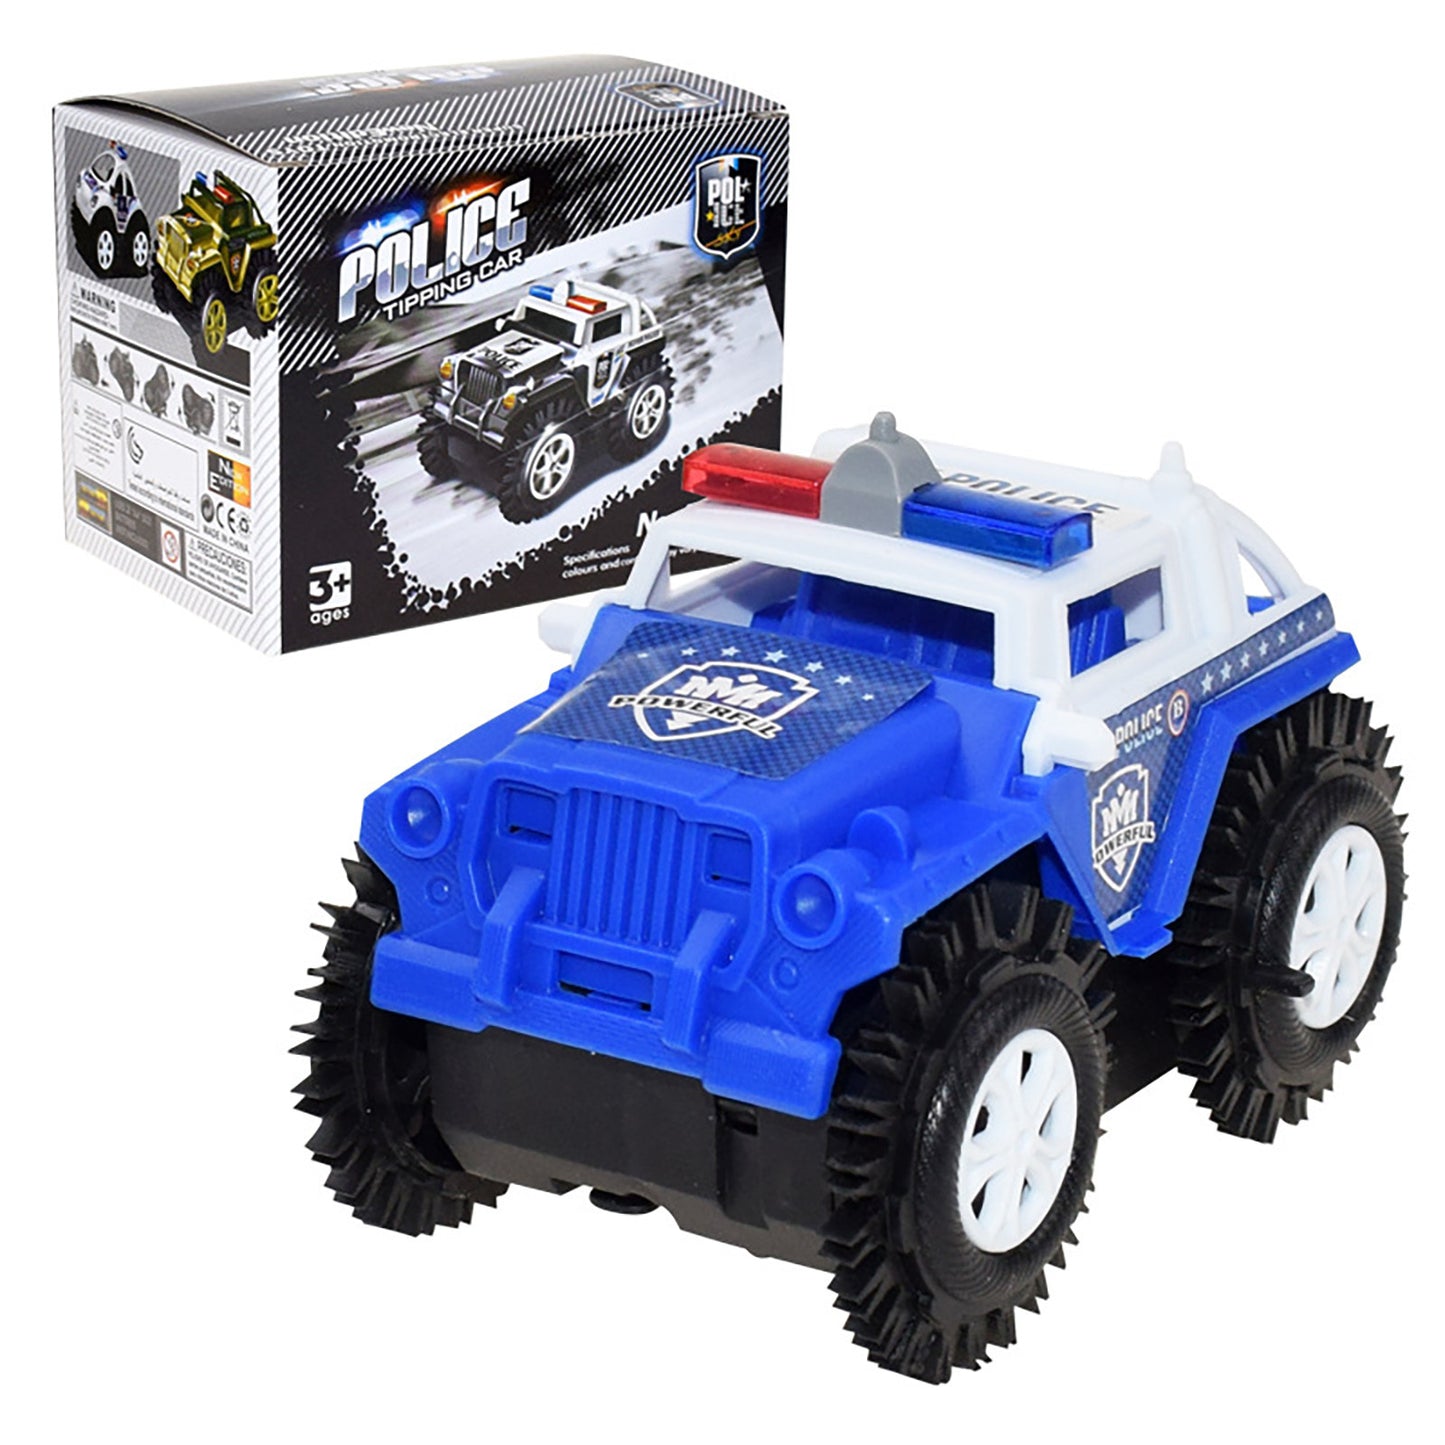 Stunt Electric Car Dumper Double Sided Tumbling Bucket Stunt Car Electric Toys 4WD Off-road Car Model Vehicle Toys For Kids